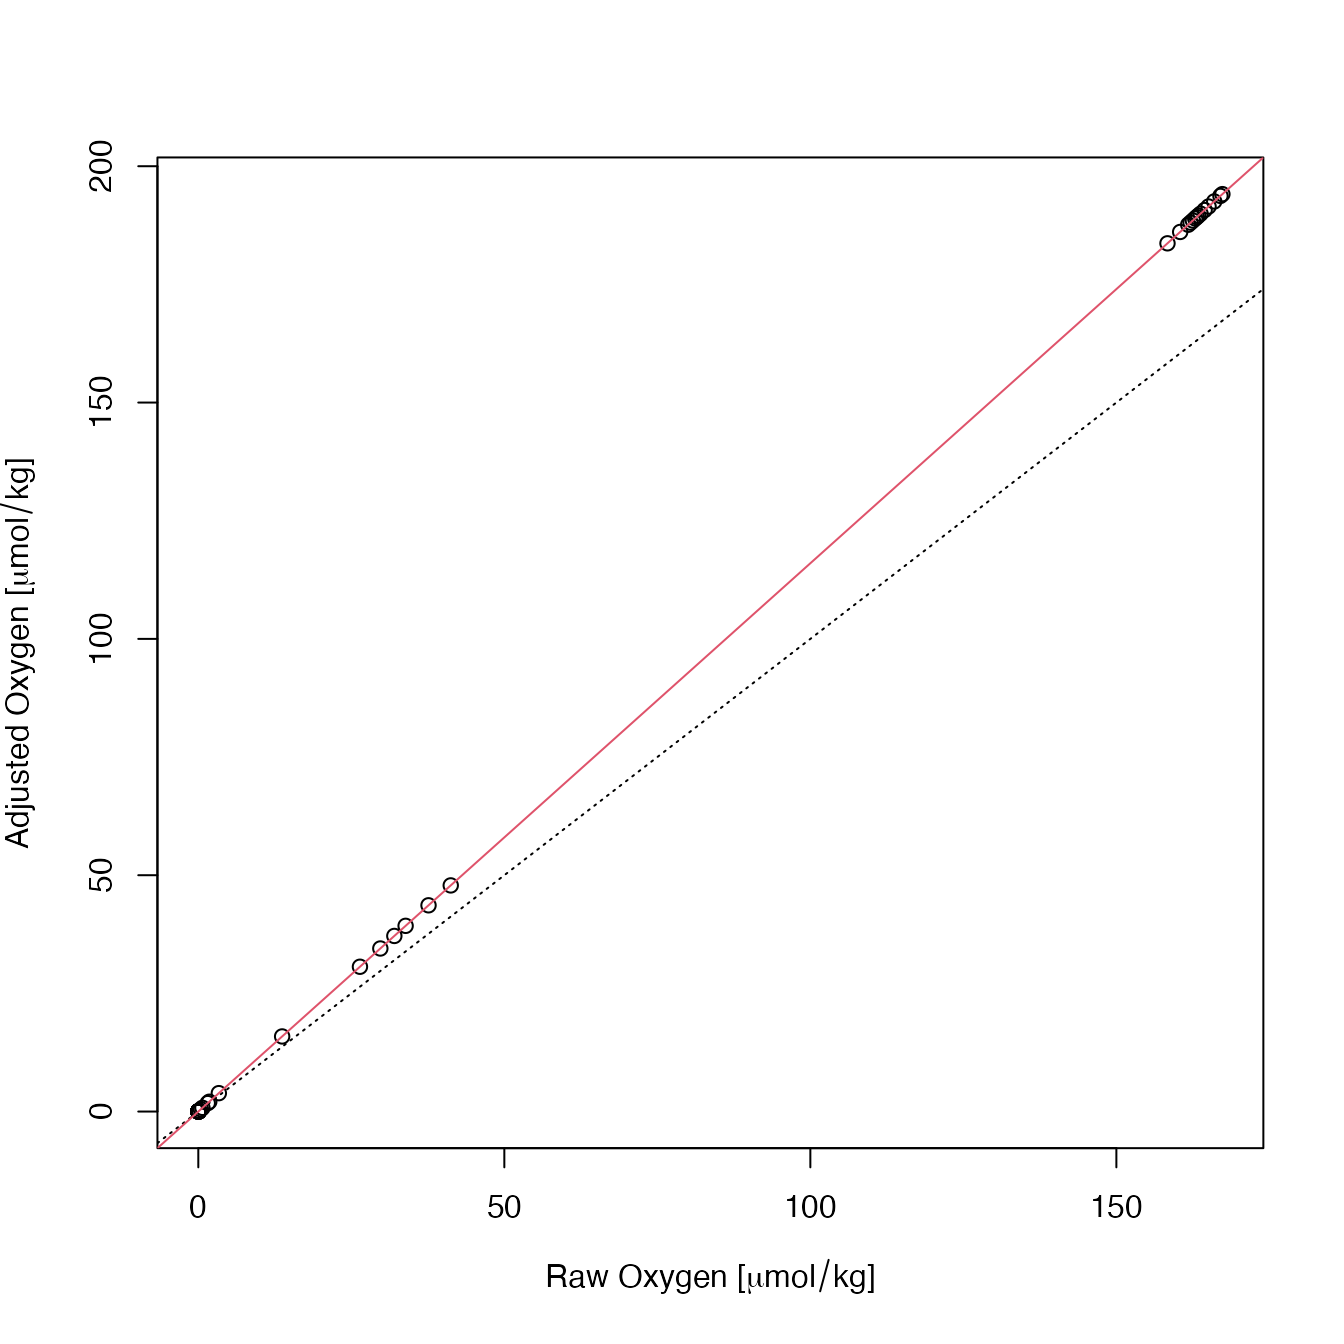 *Figure 6.* Comparison of raw and adjusted oxygen for built-in float file `SD5903586_001.nc`.  The dotted line is a 1:1 relationship, and the red line is the result of linear regression (see text).